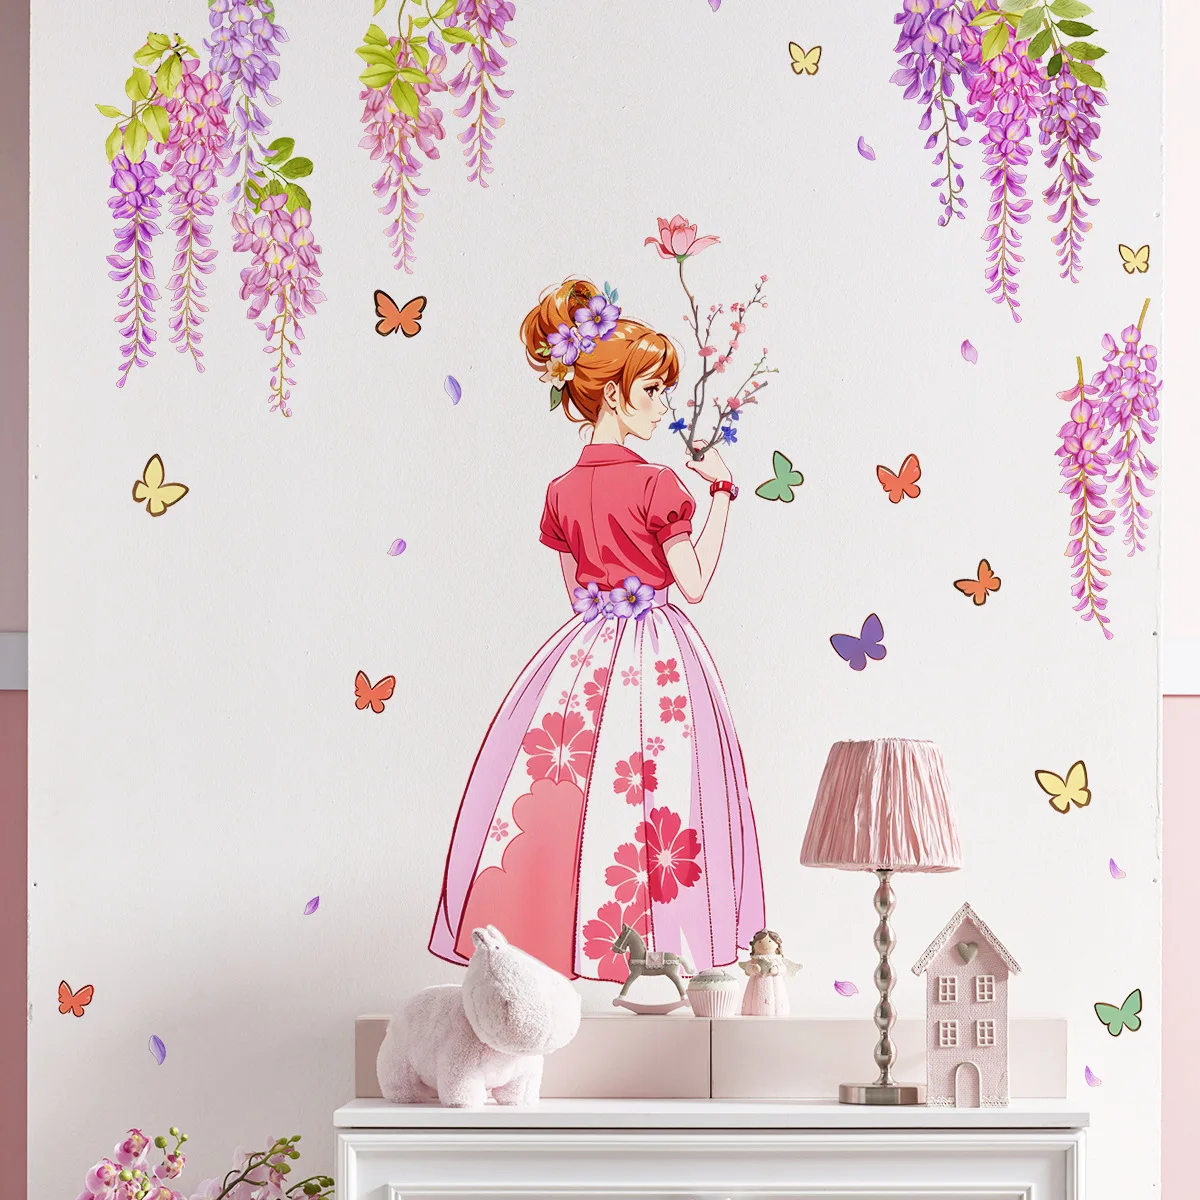 2pcs Plant Vine Girl Butterfly Wall Stickers Living Room Bedroom Background Wall Home Decorative Wall Stickers Wallpaper Ms3032 beibehang self adhesive pink 3d stereo wall stickers warm pastoral fresh girl bedroom living room tv background wallpaper